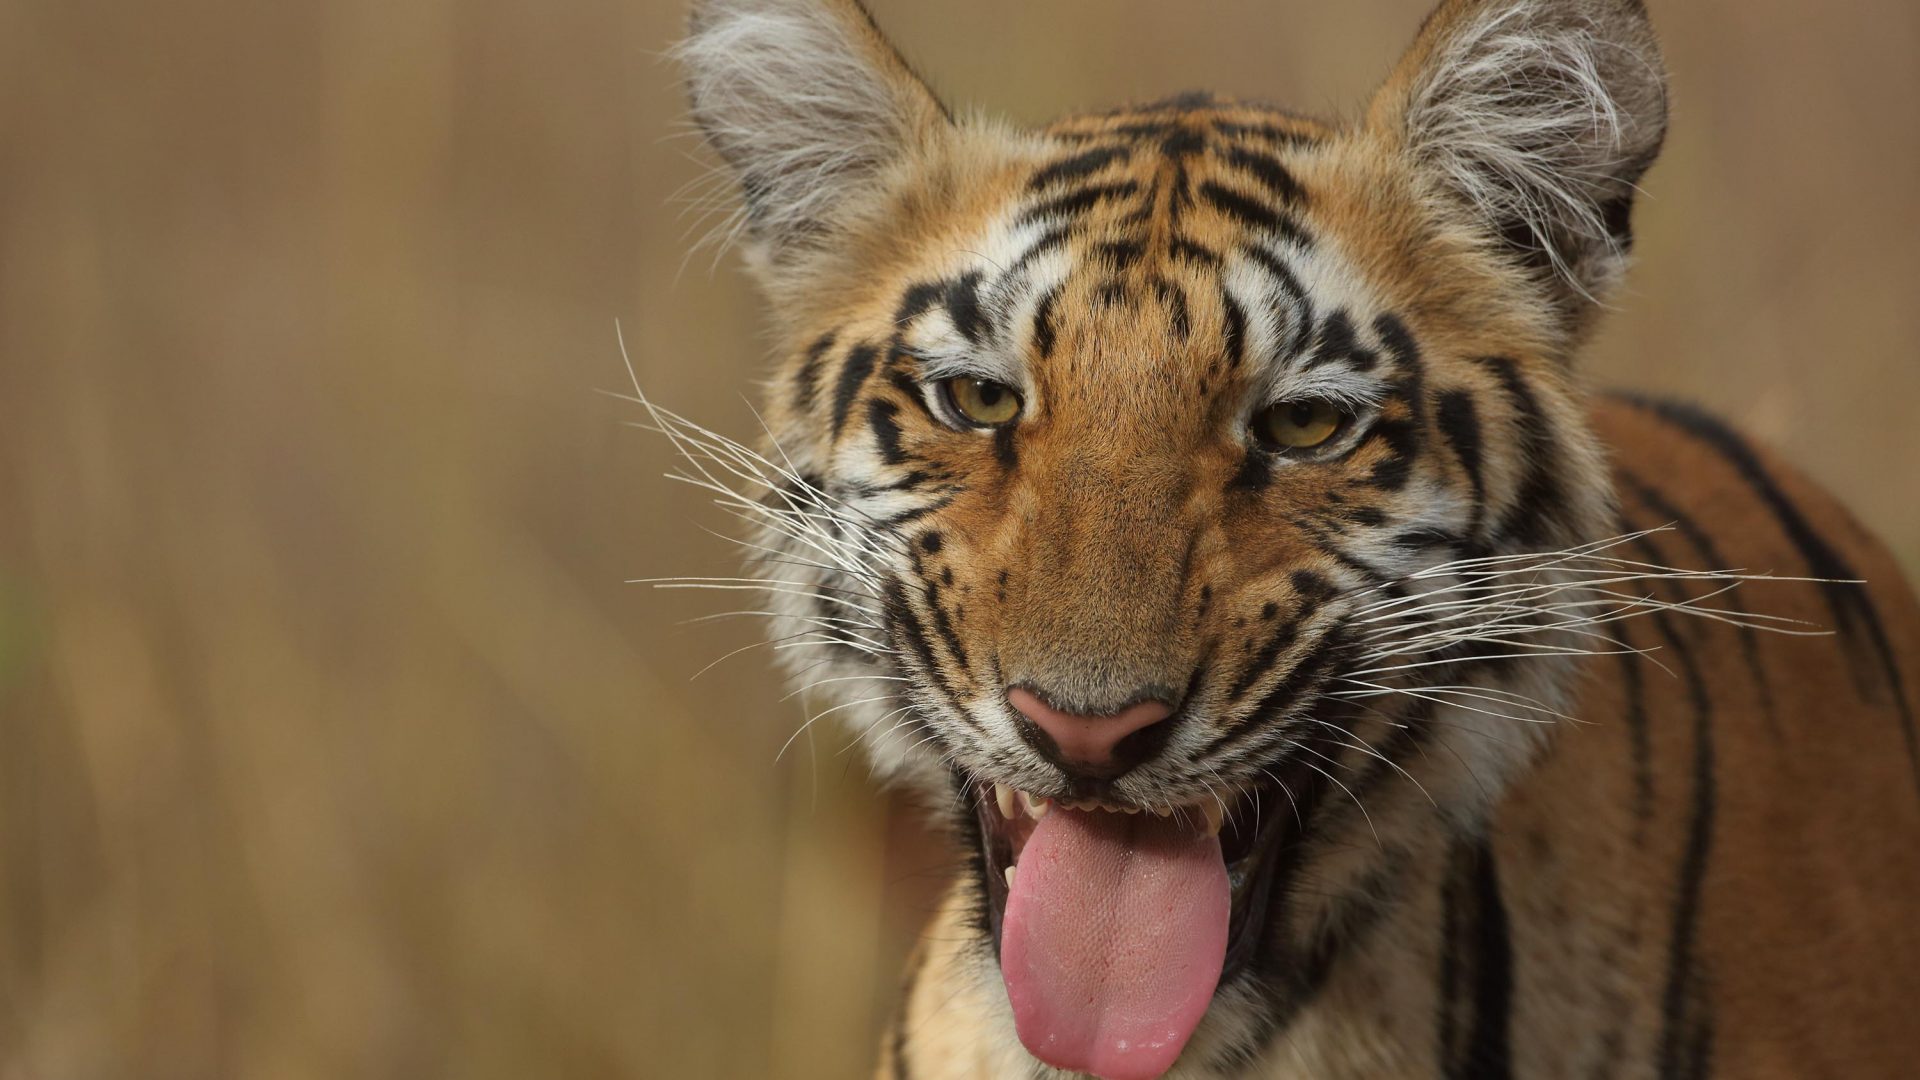 A tiger, one of the animals selected for the New Big 5.